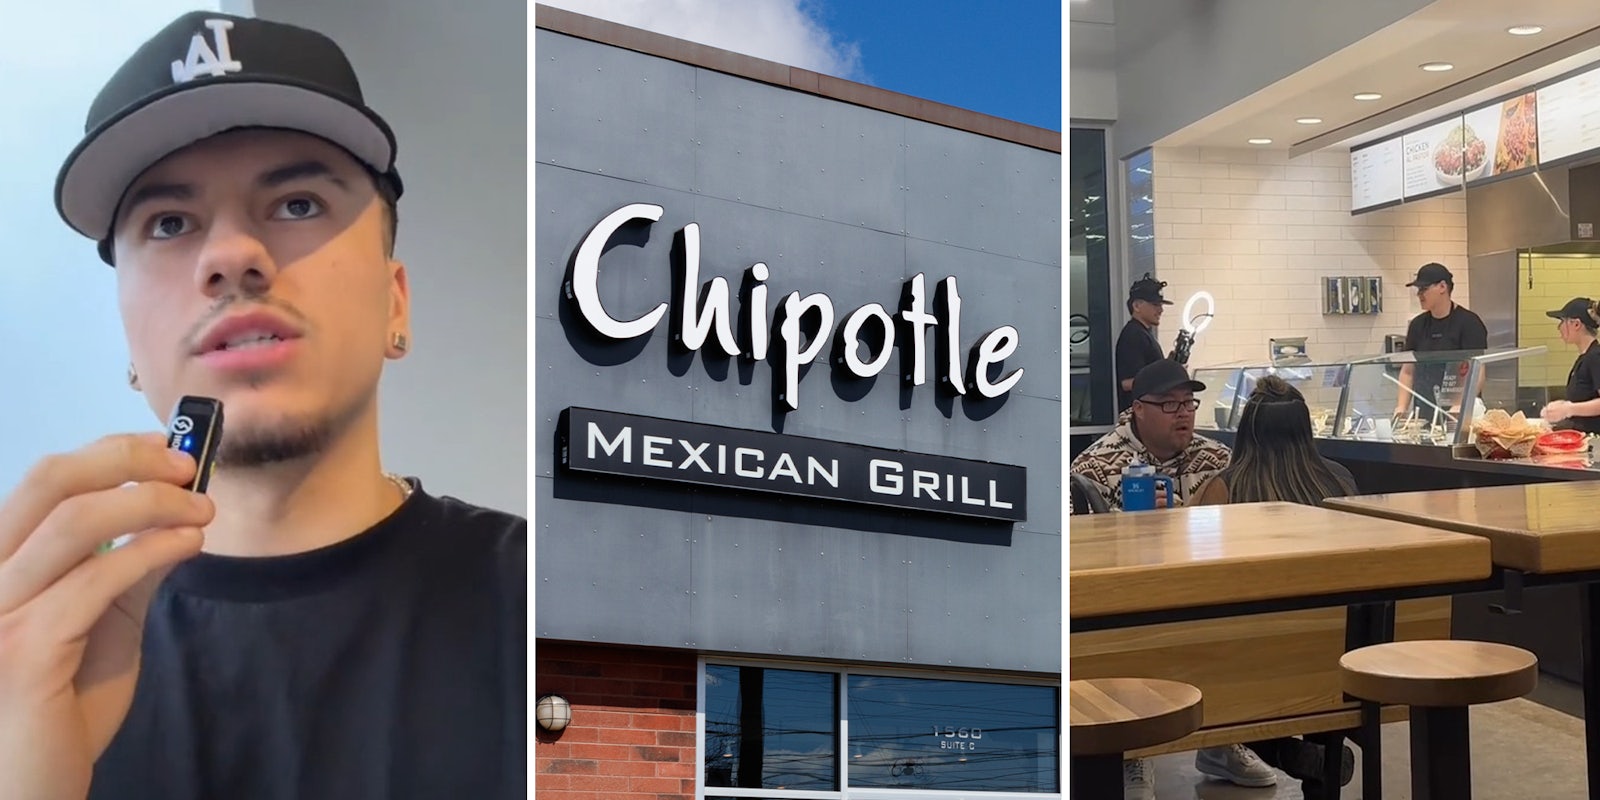 Customers tests ‘phone trick’ at Chipotle